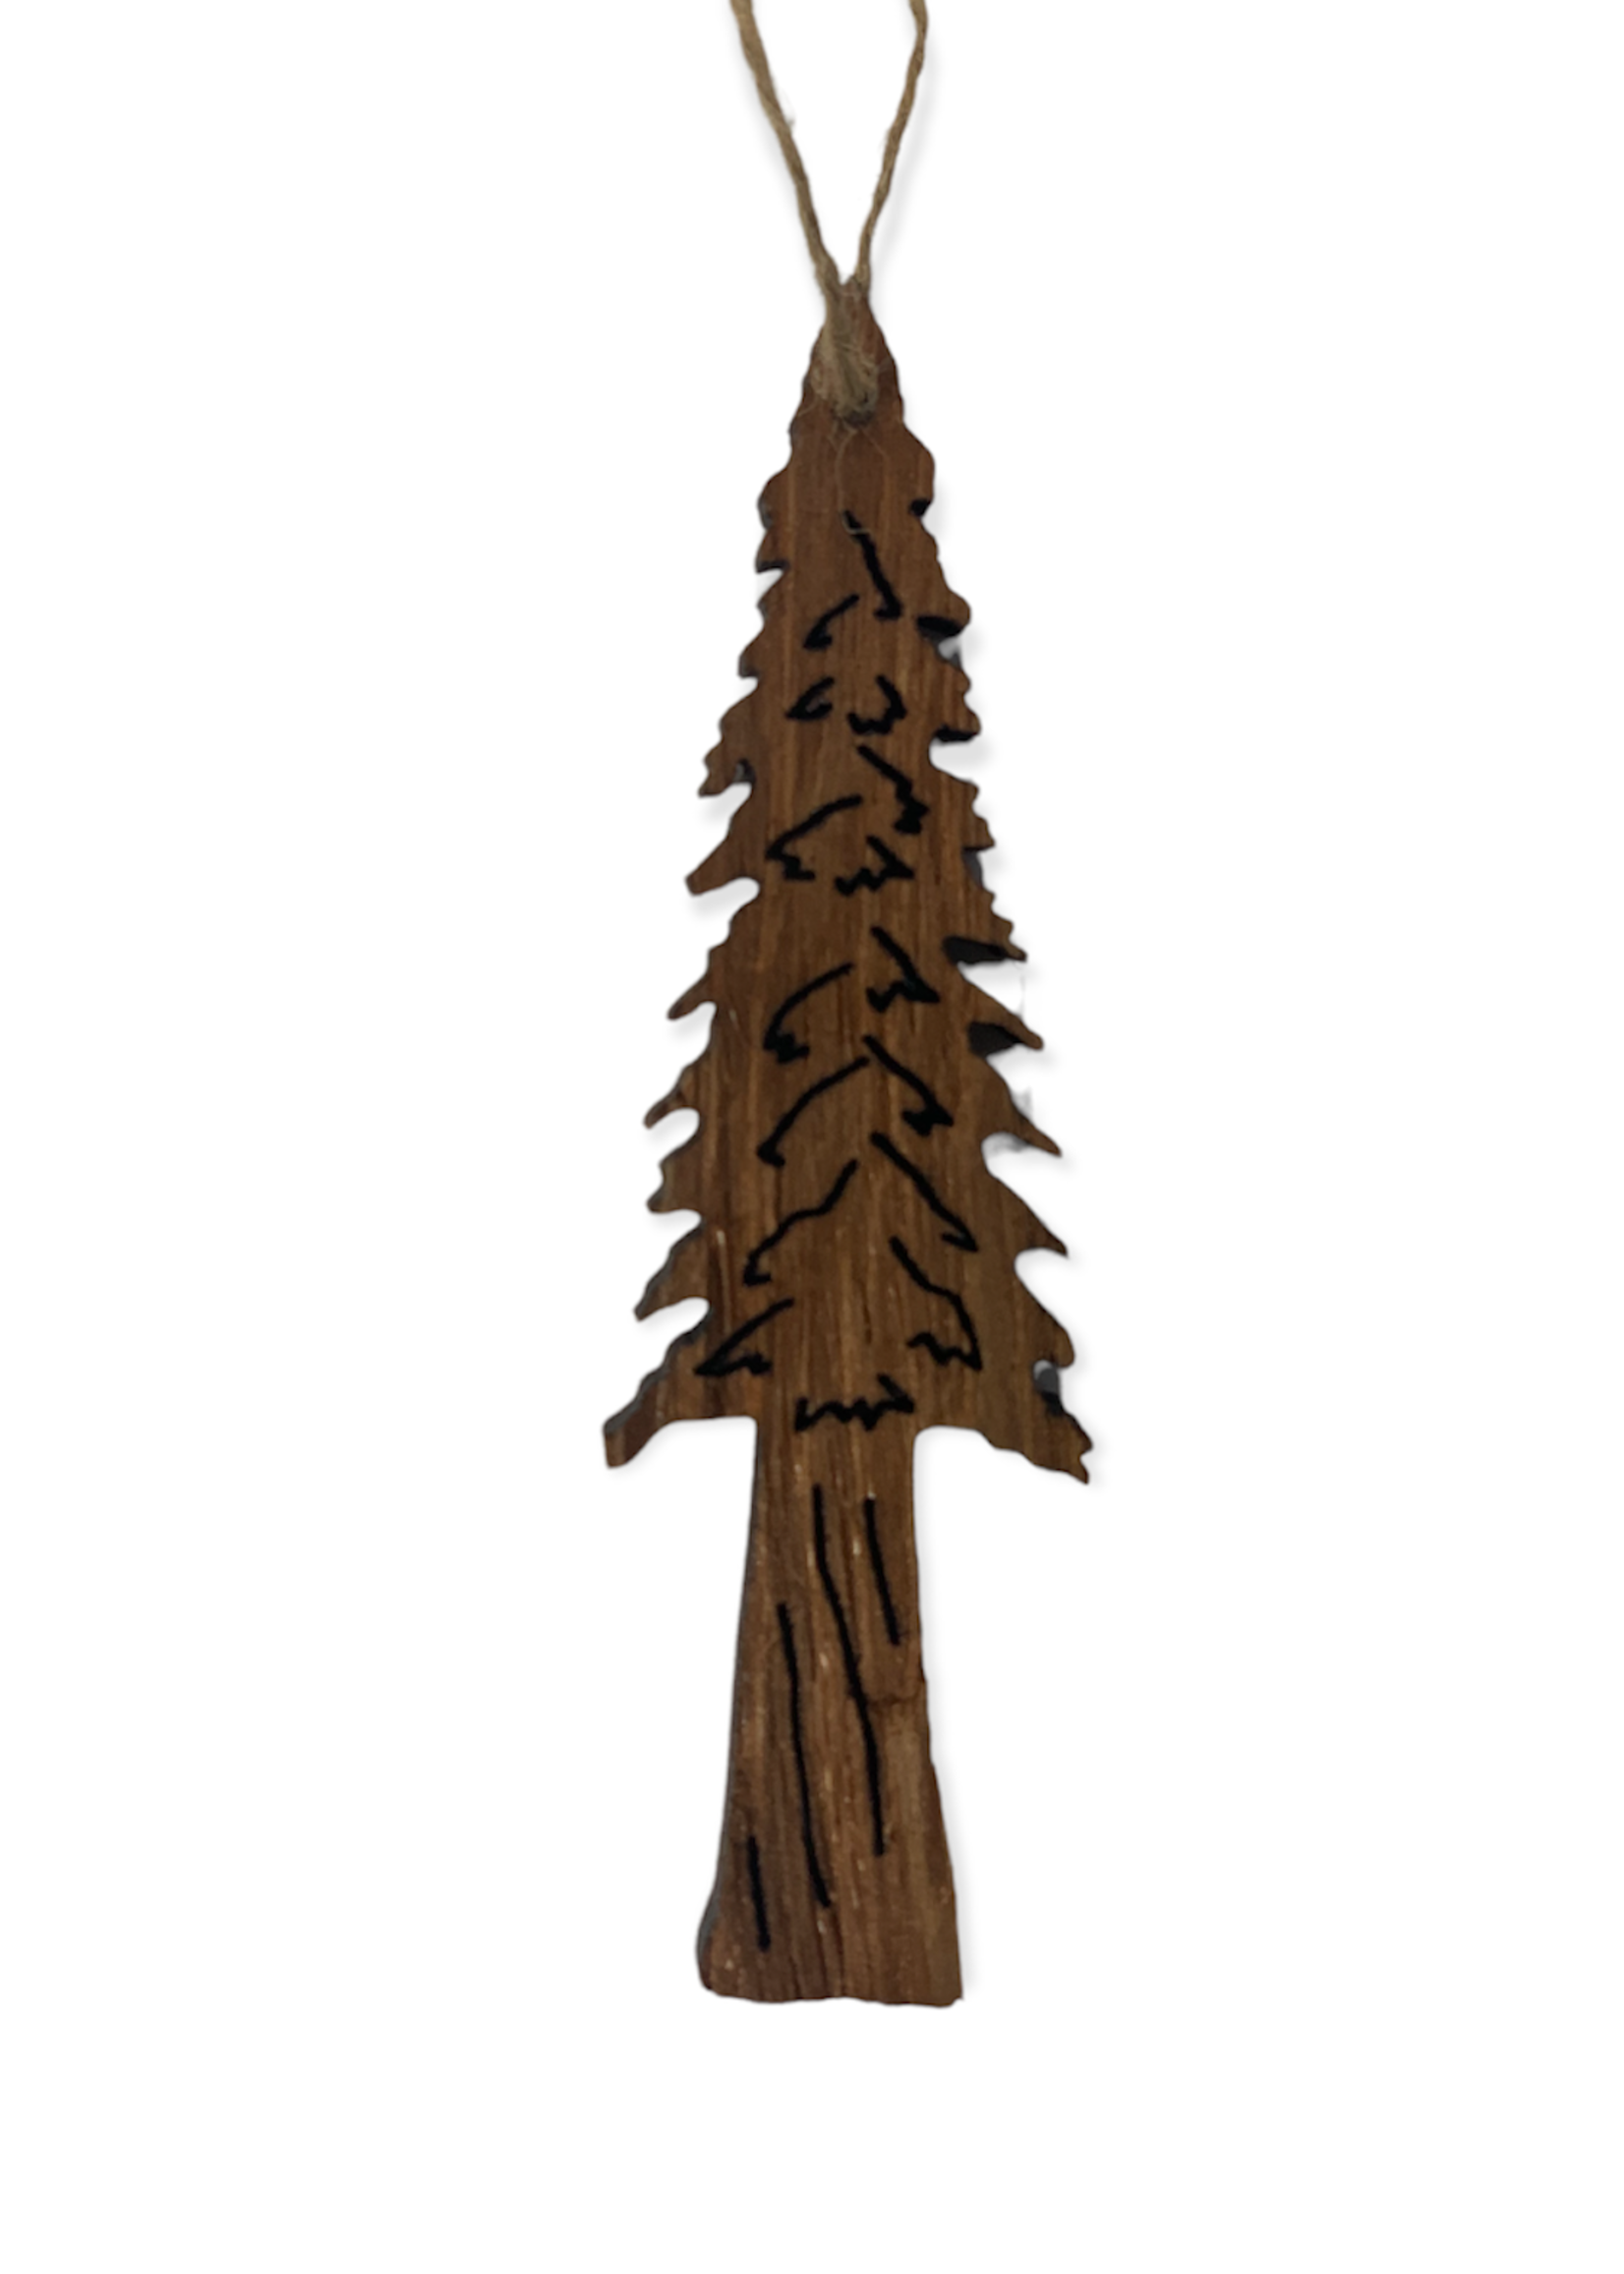 Redwood Ornament (Old-Growth Tree)